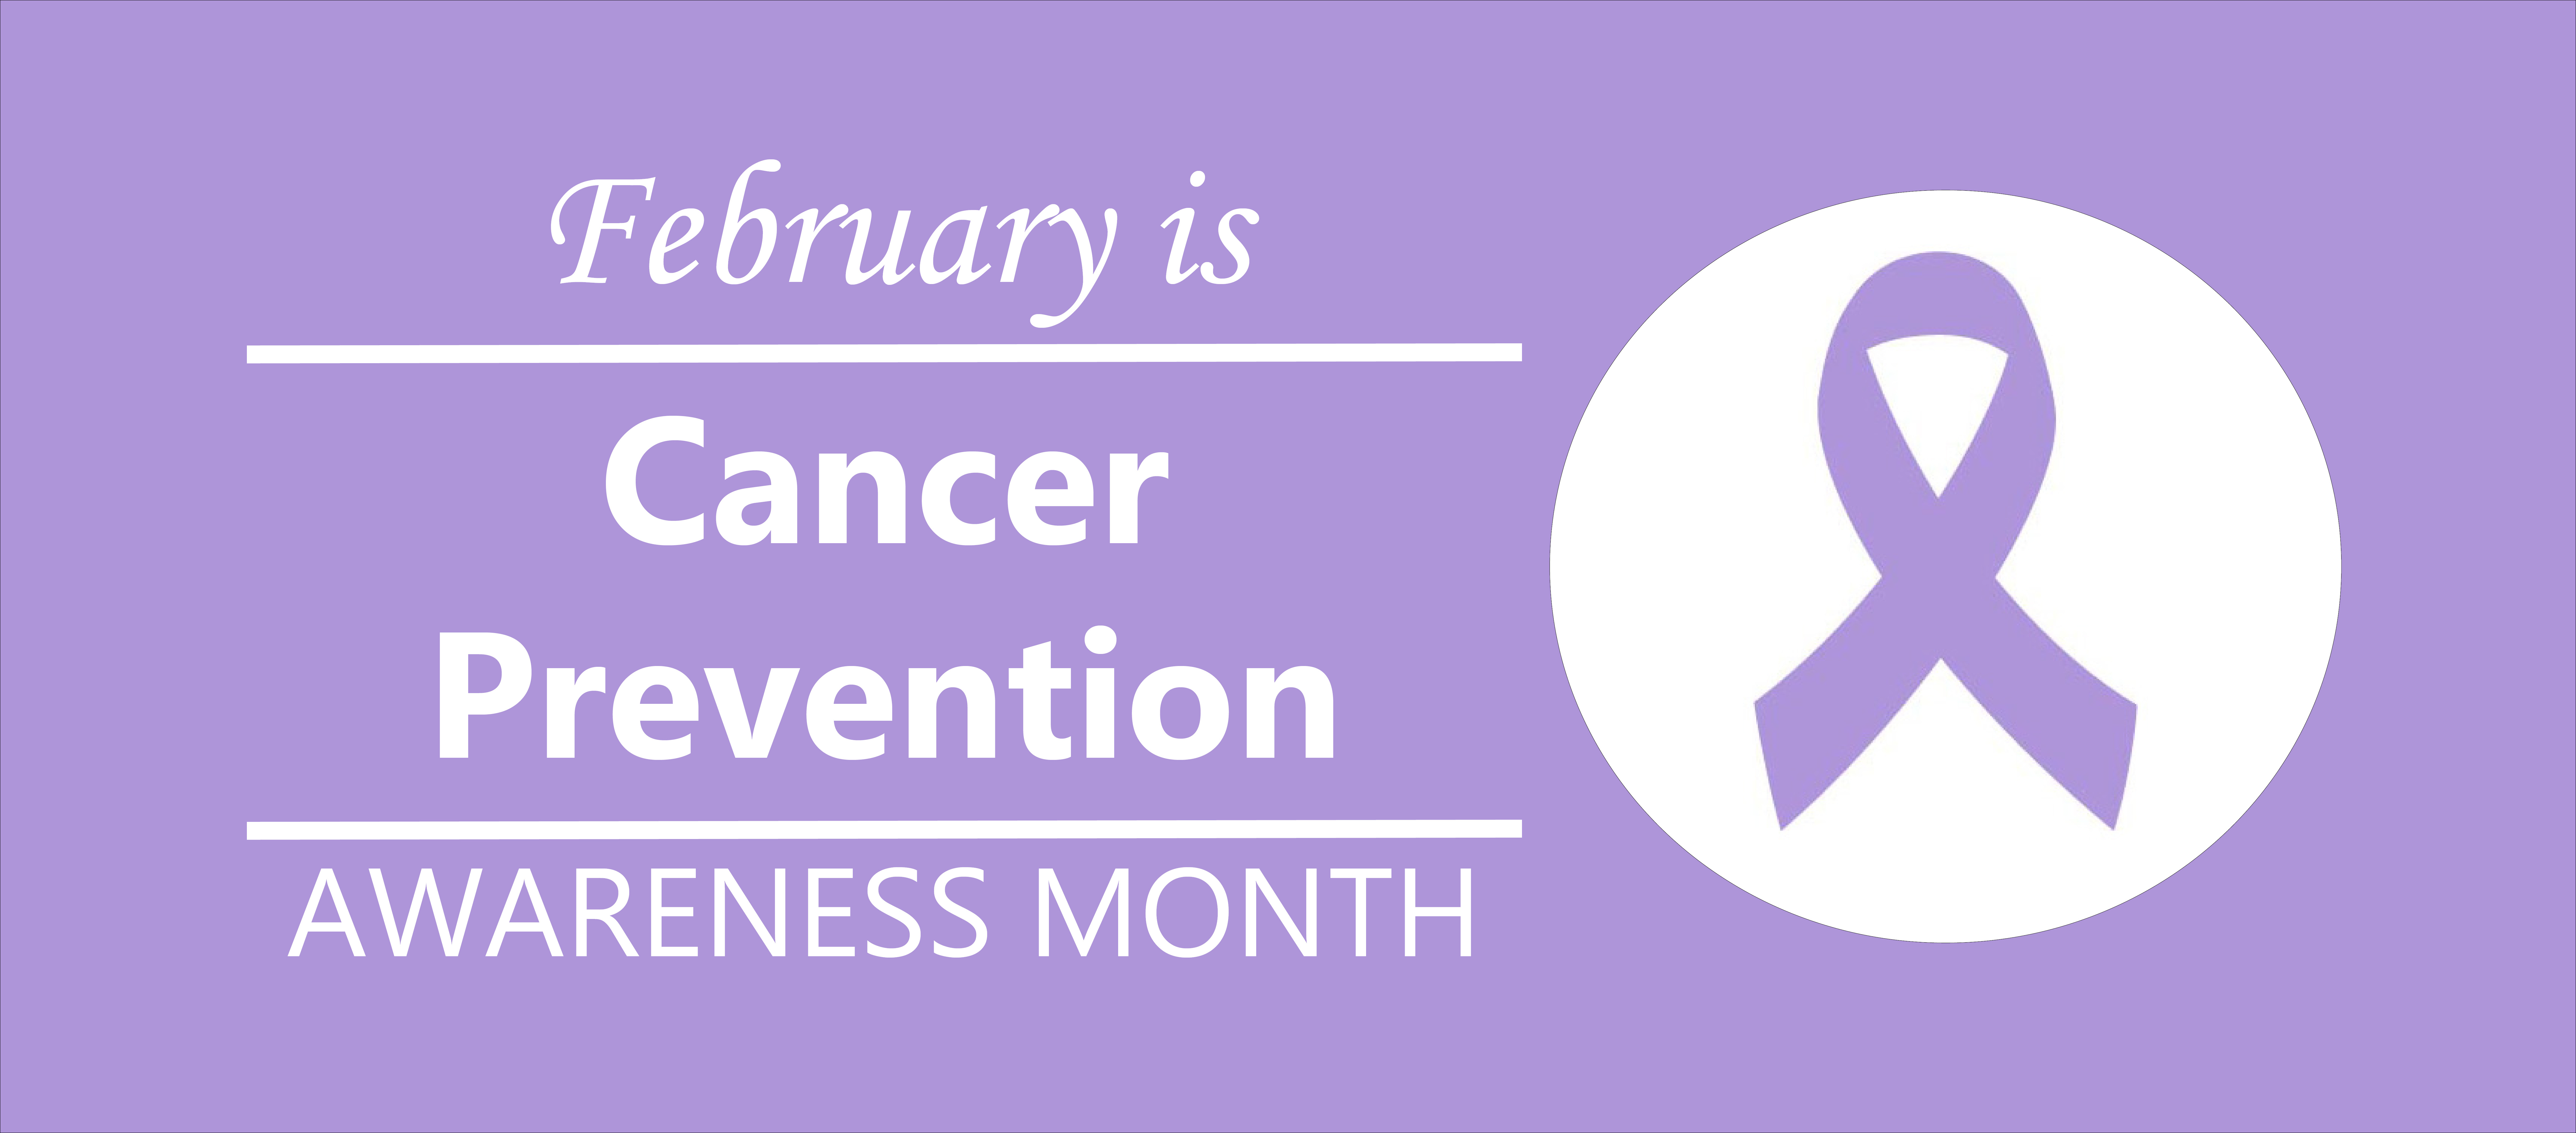 February Cancer Prevention Month